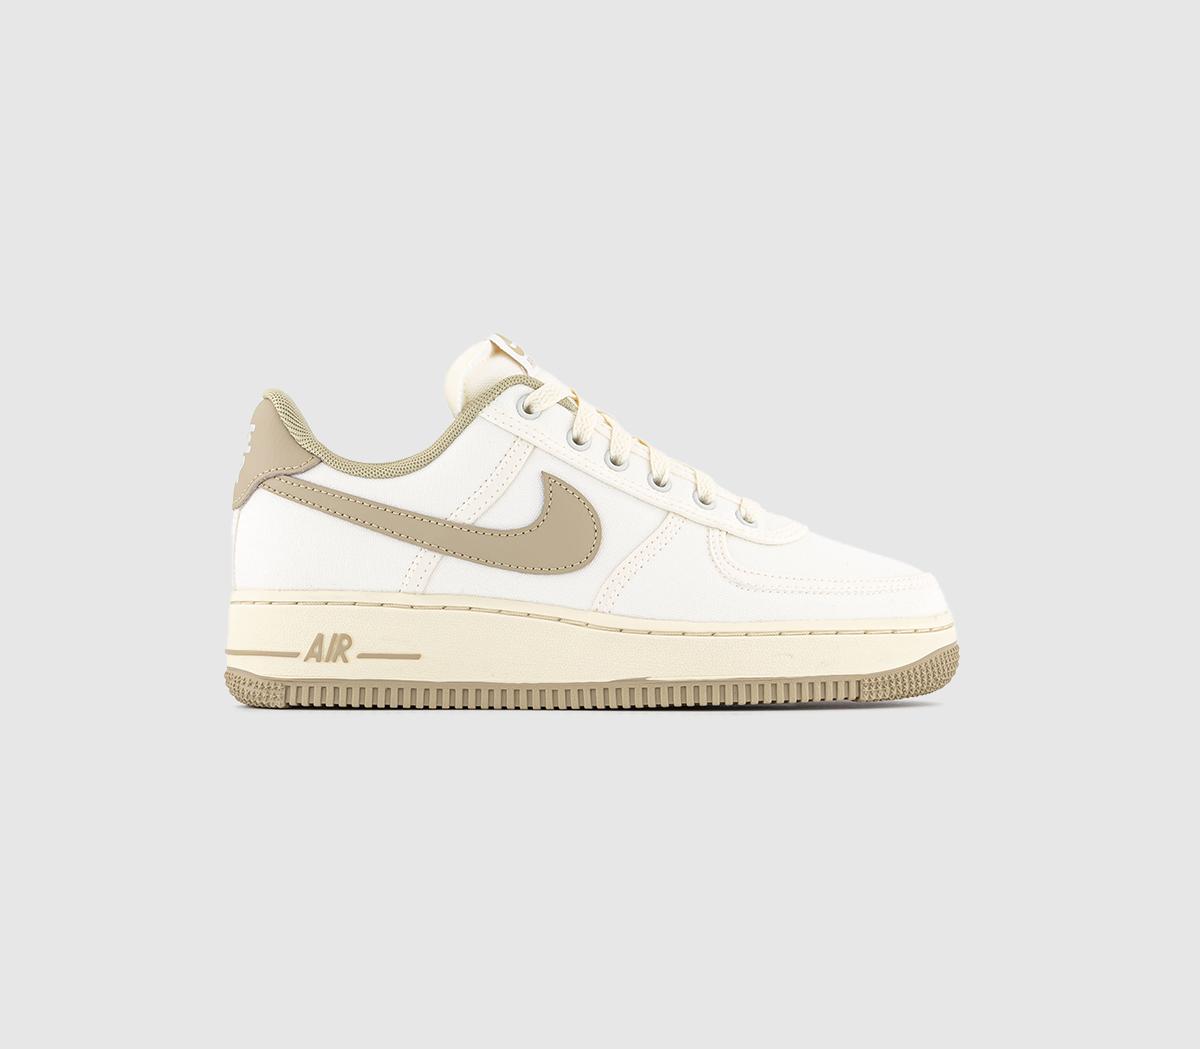 NikeAir Force 1 '07 NCPS Trainers WmnsSail Limstone Pale Vanilla Coconut Milk White